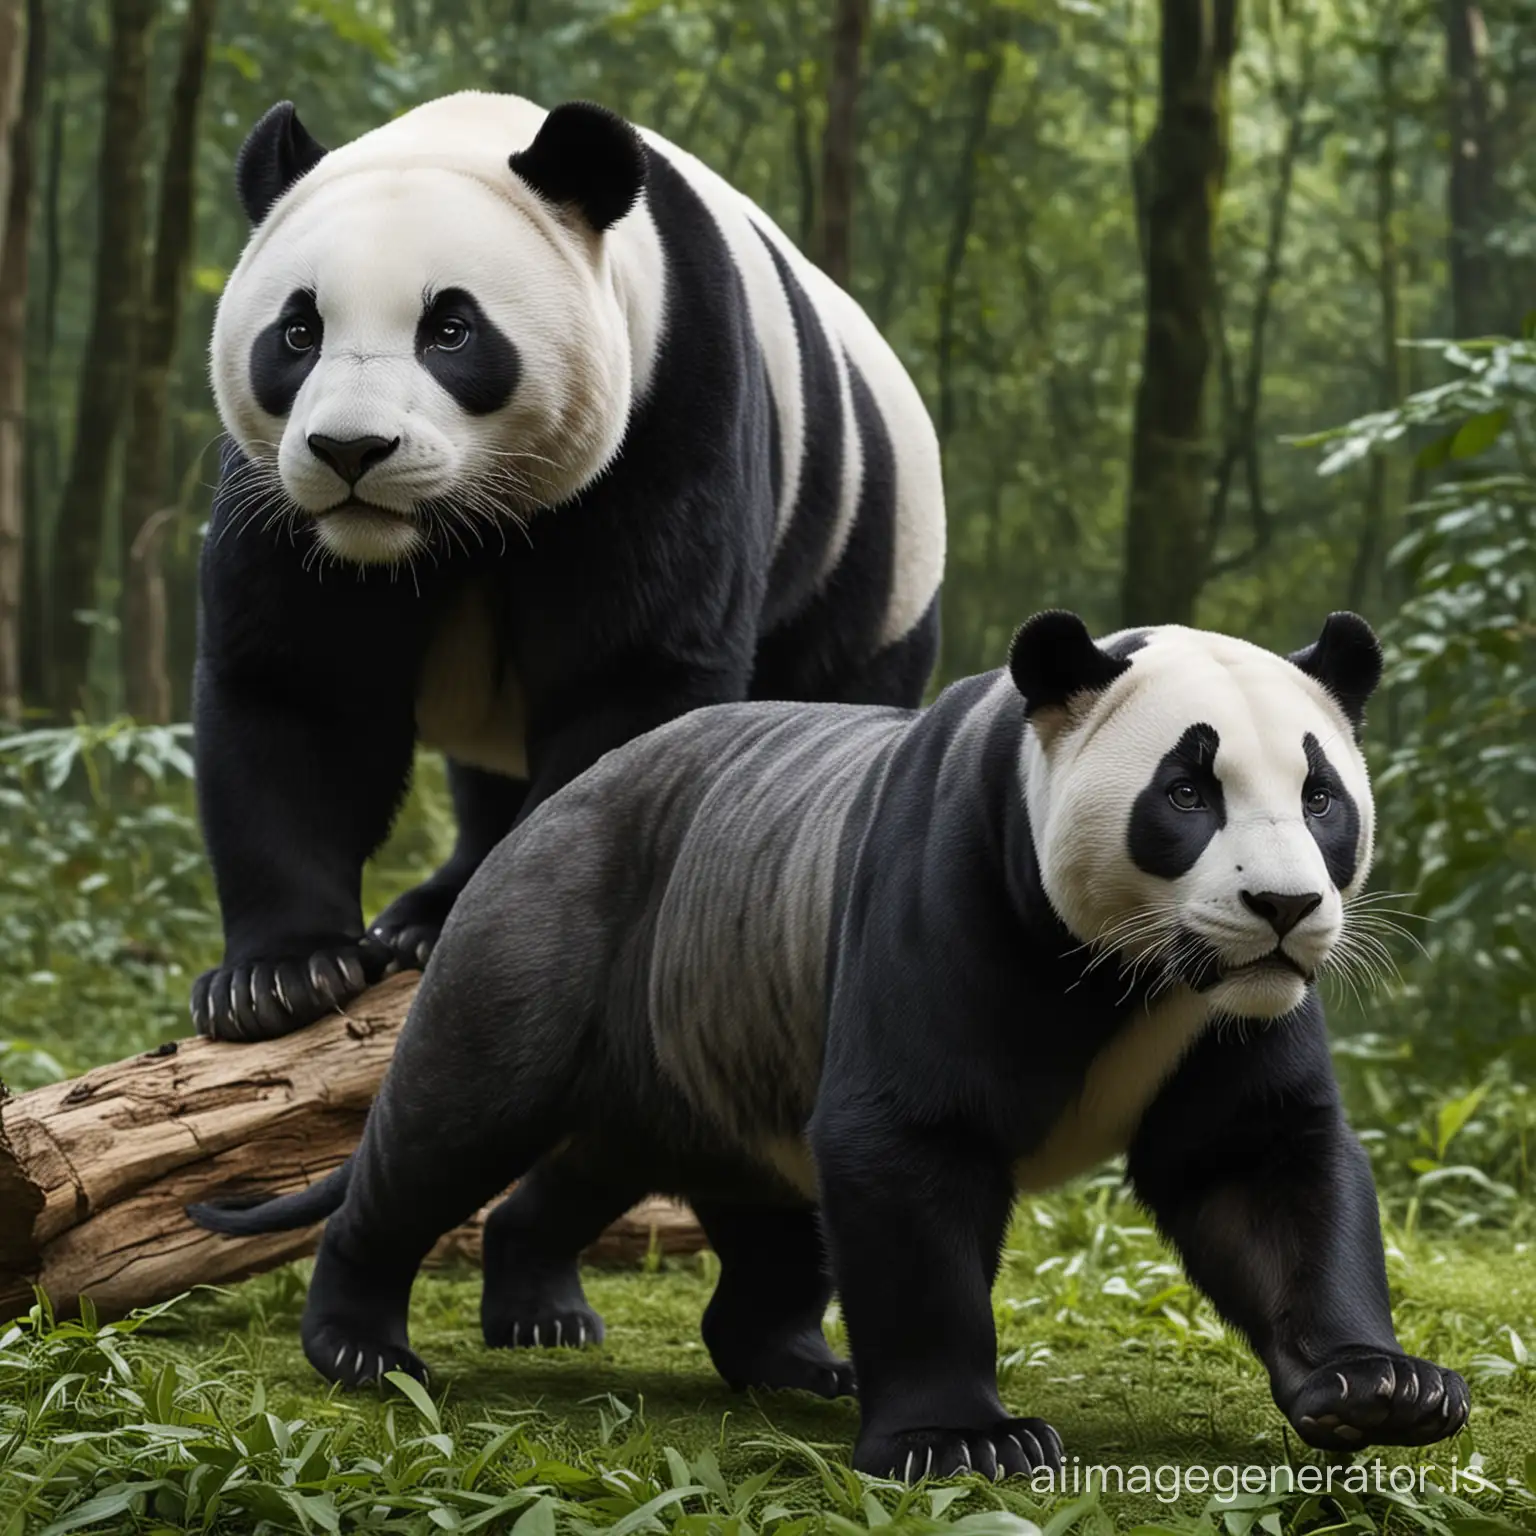 Please build an animal from the combination of a panda and a panther, with the forest at the back